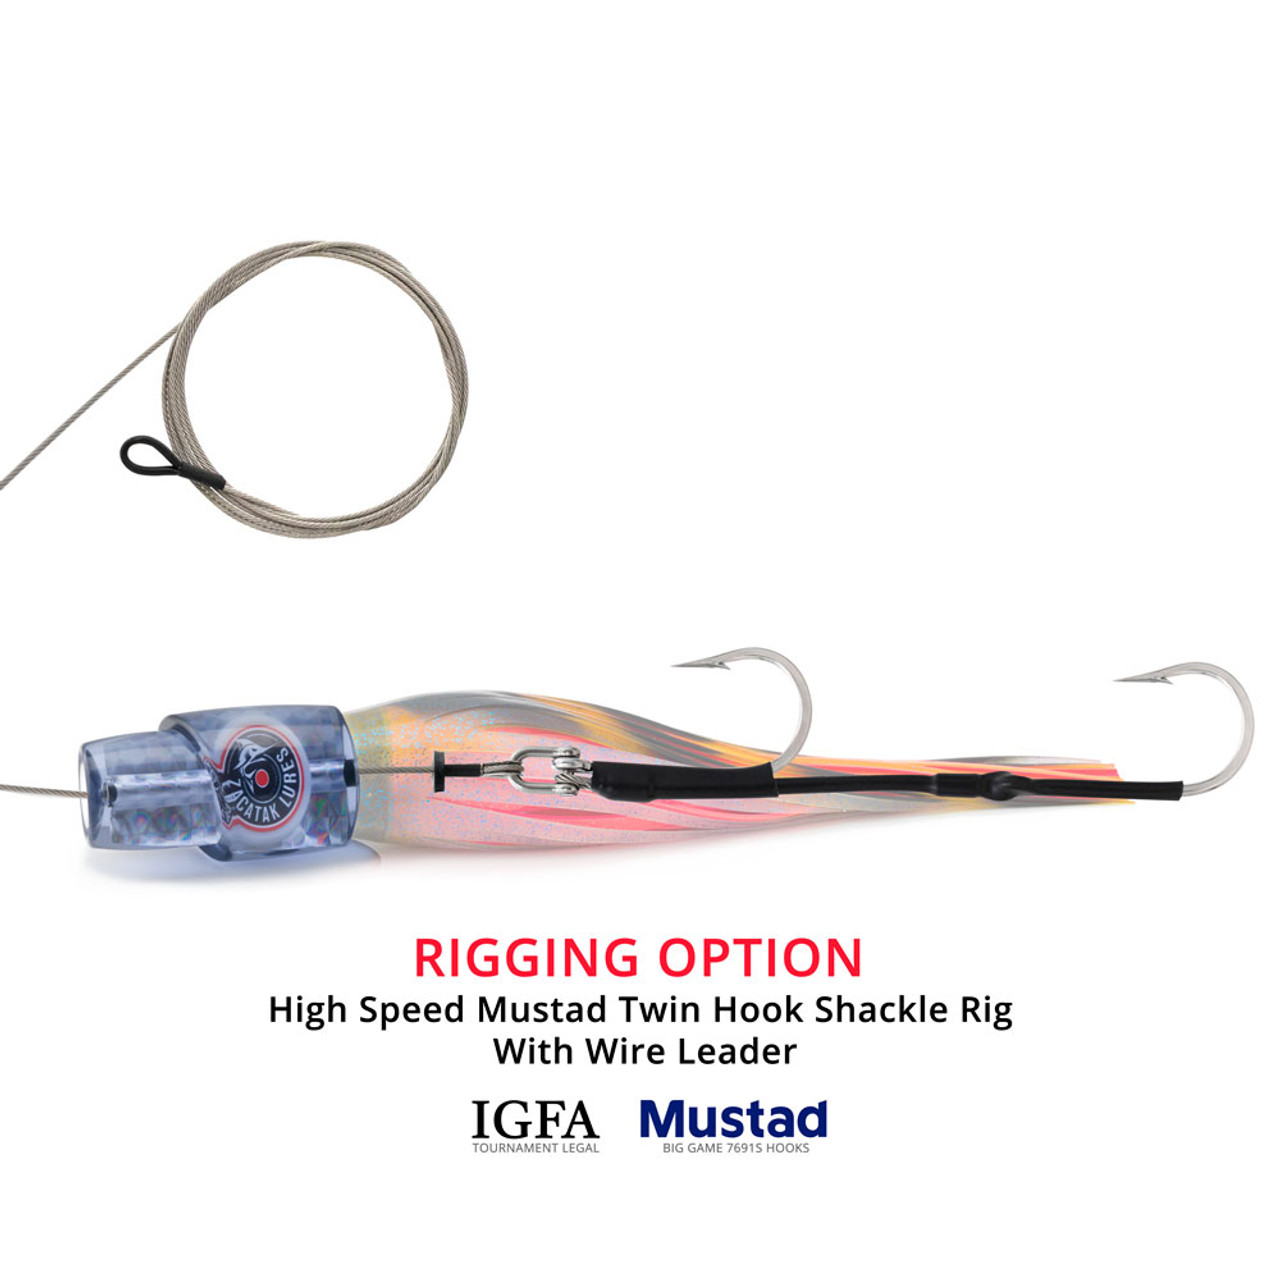 https://cdn11.bigcommerce.com/s-sv4r4mic/images/stencil/1280x1280/products/9284/50462/zacatak-lures-high-speed-rigging-option-twin-hook-shackle-rig-thunderstruck__13101.1671434112.jpg?c=2?imbypass=on